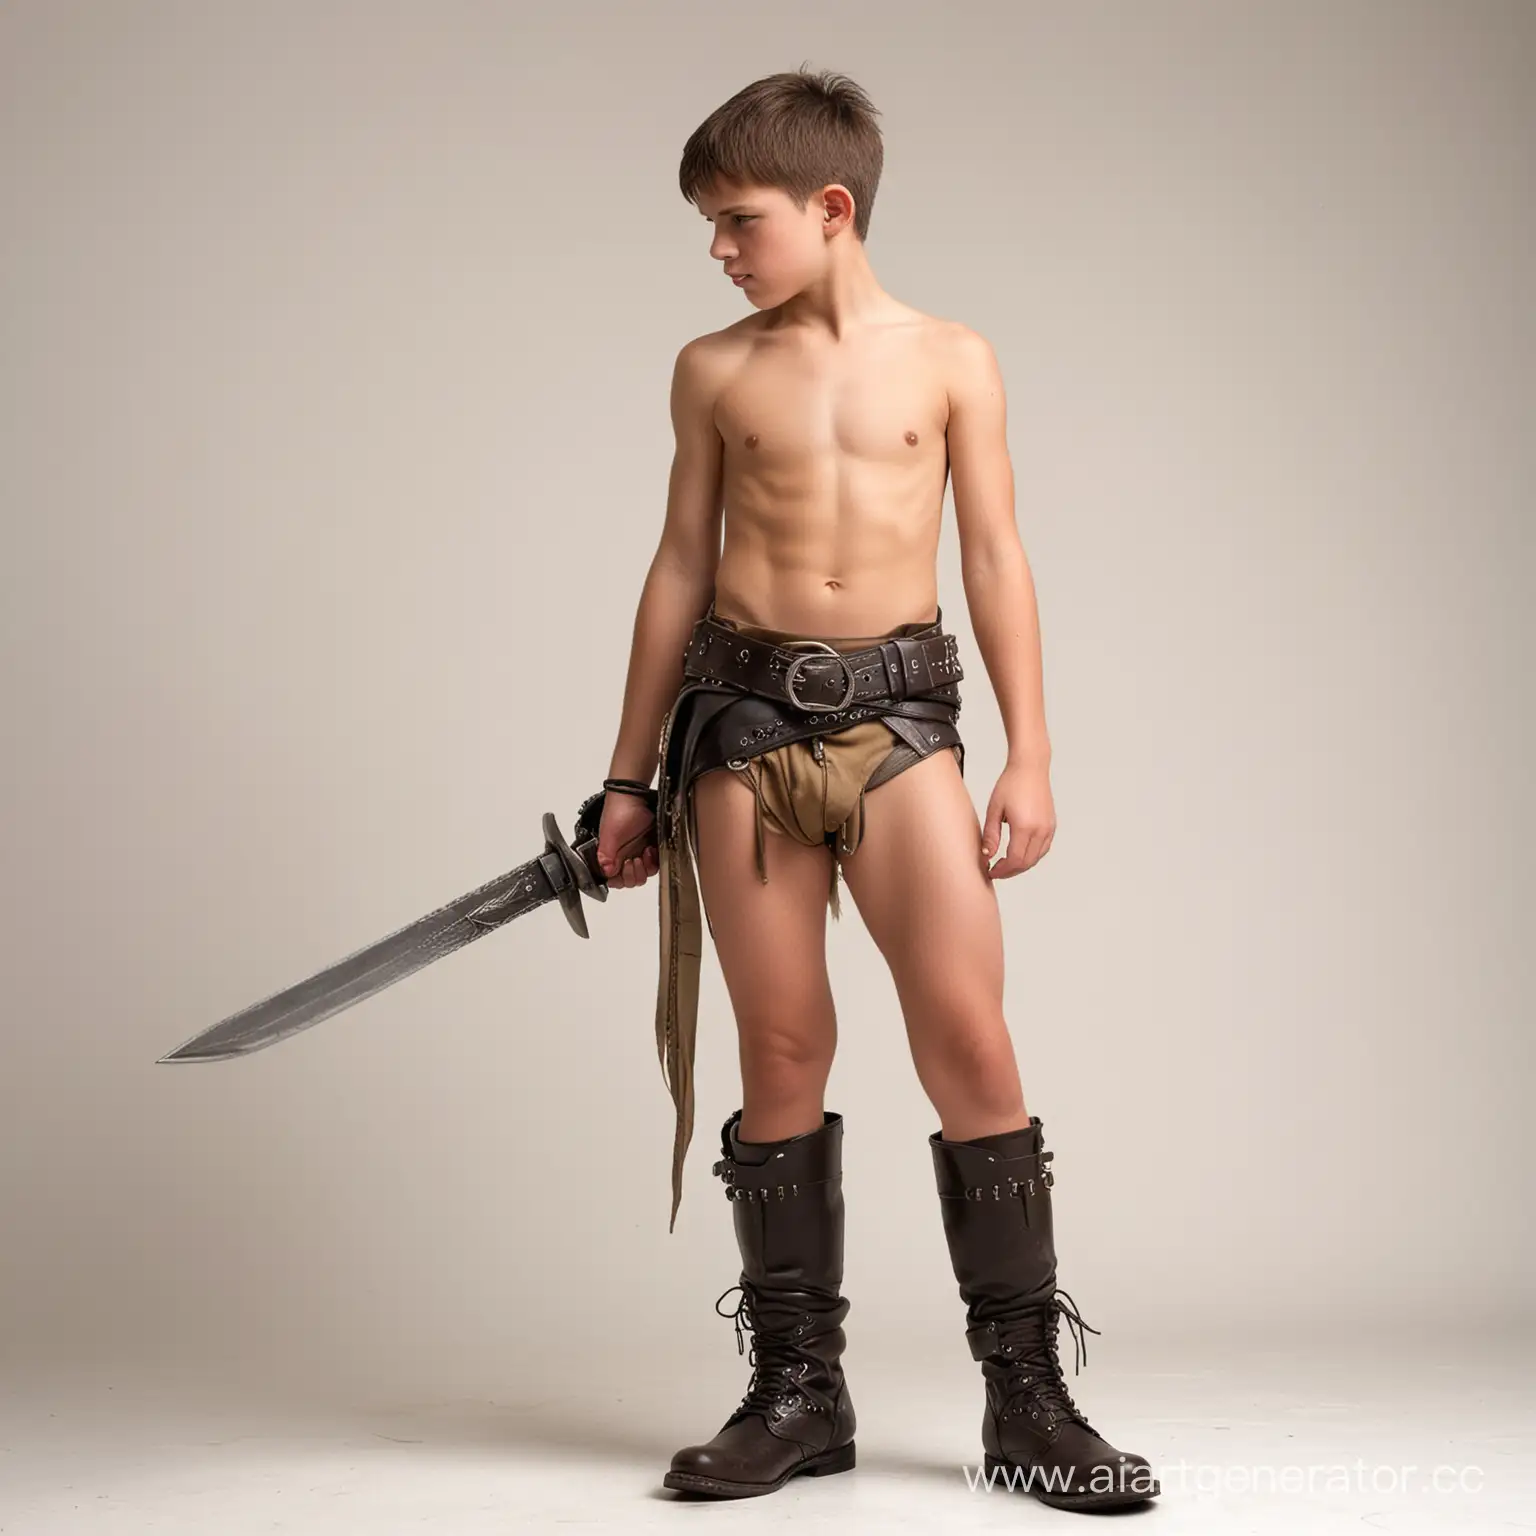 Muscular-Teenage-Warrior-Profile-with-Loincloth-and-Leather-Belt-on-White-Background